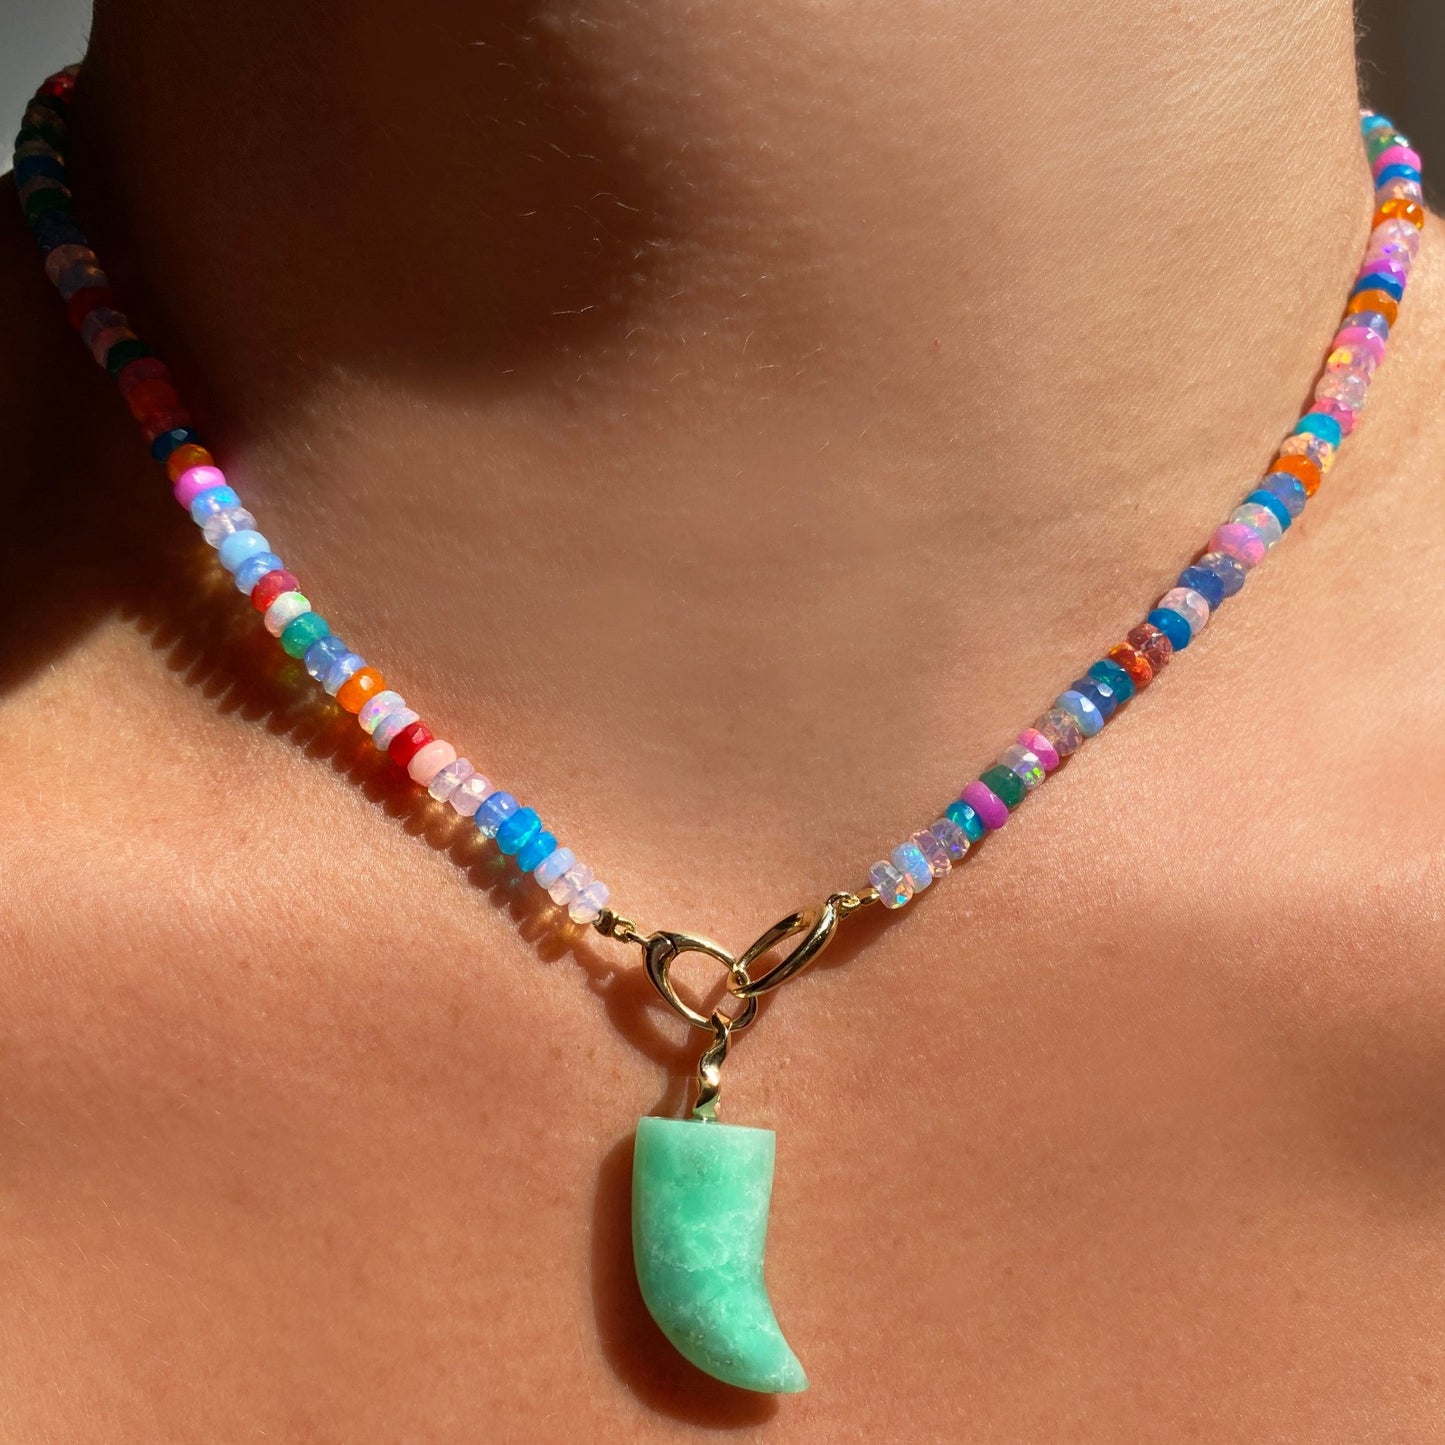 Shimmering beaded necklace made of faceted opals in shades of fiery blues, yellows, teal, and purple on a gold linking ovals clasp. Styled on a neck layered with an amazonite horn charm.